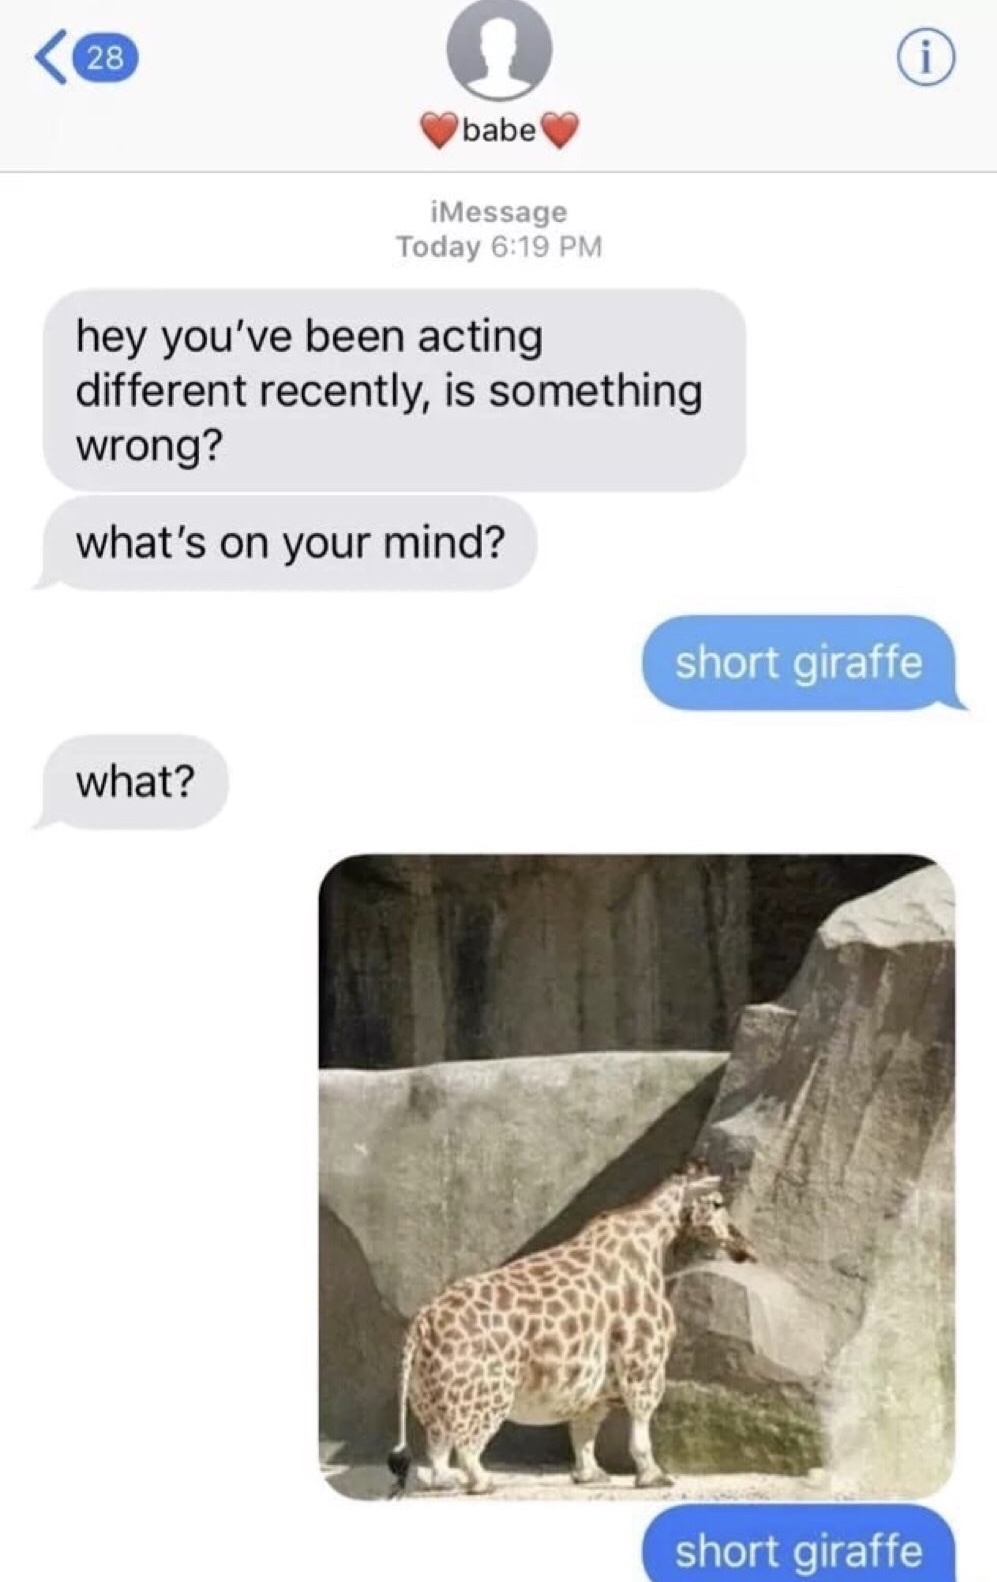 memes - short giraffe - 28 babe iMessage Today hey you've been acting different recently, is something wrong? what's on your mind? short giraffe what? short giraffe